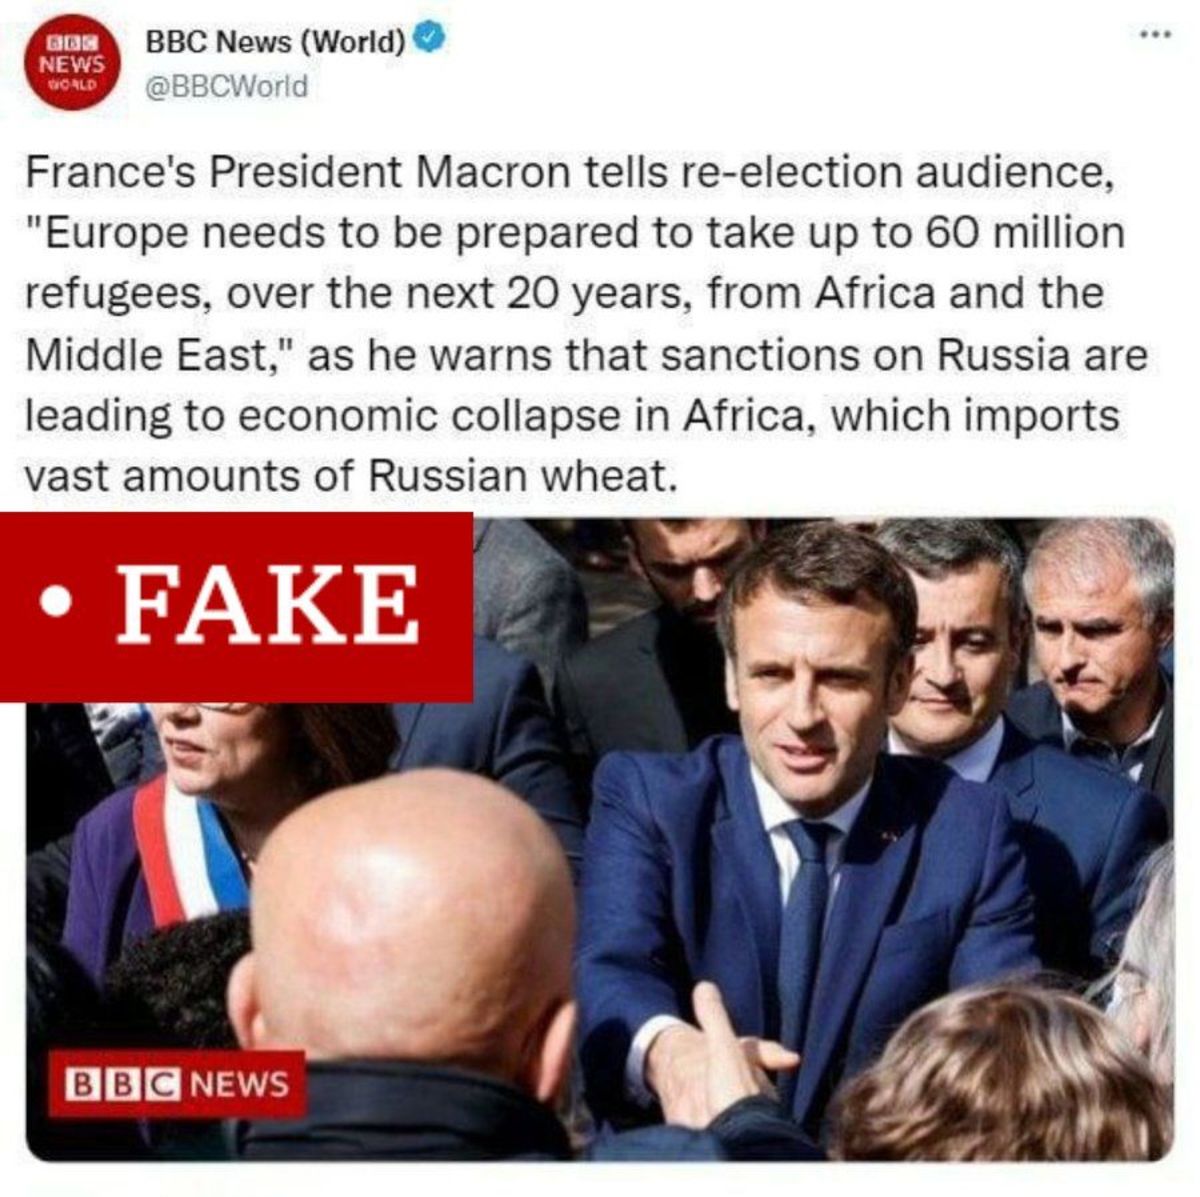 2017 France electtion's disinformation attack by Russia.